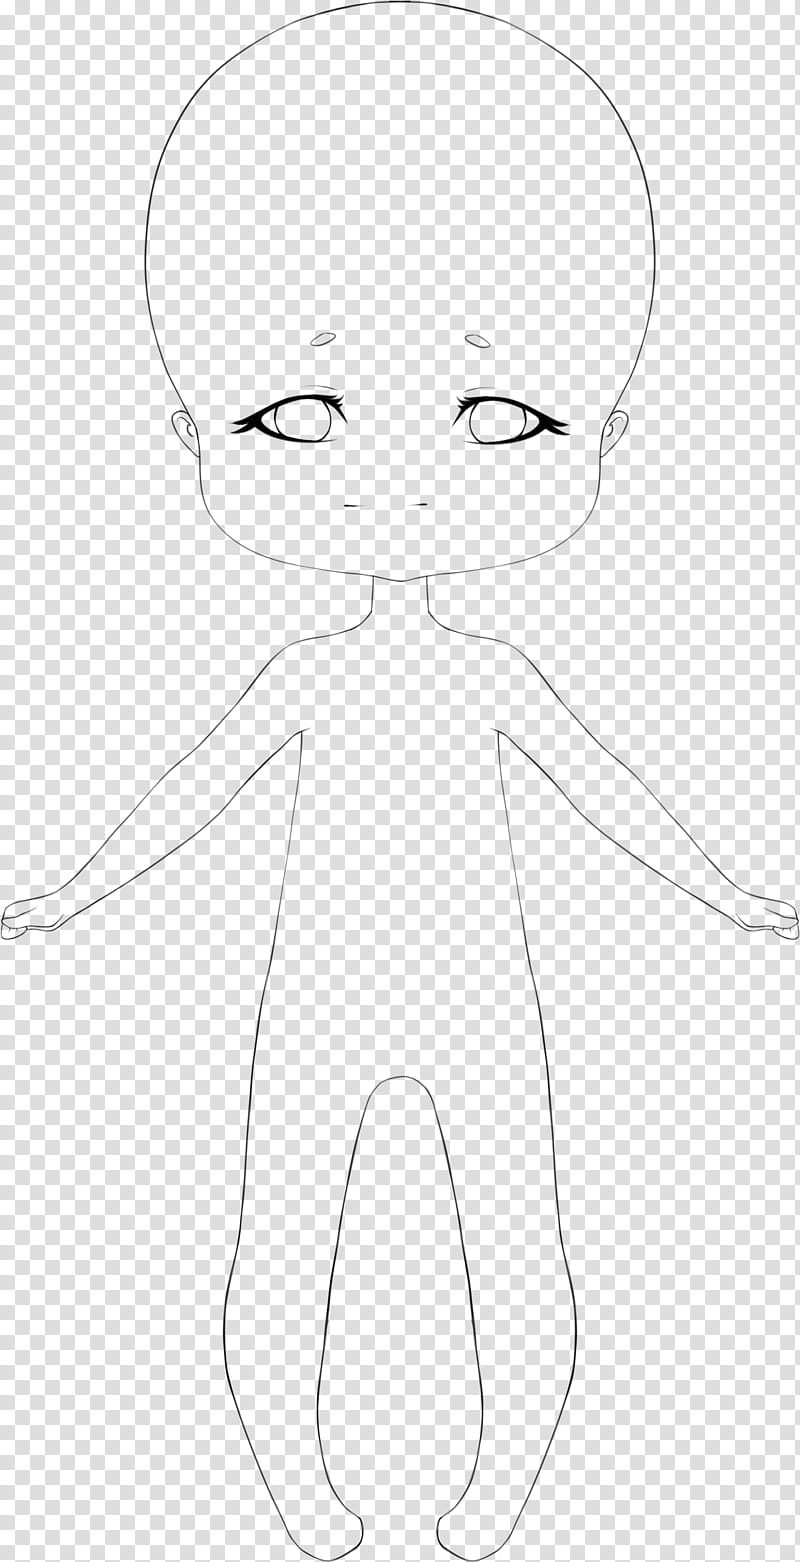 How to Draw Chibi - Boy or Girl From One Chibi Body Base